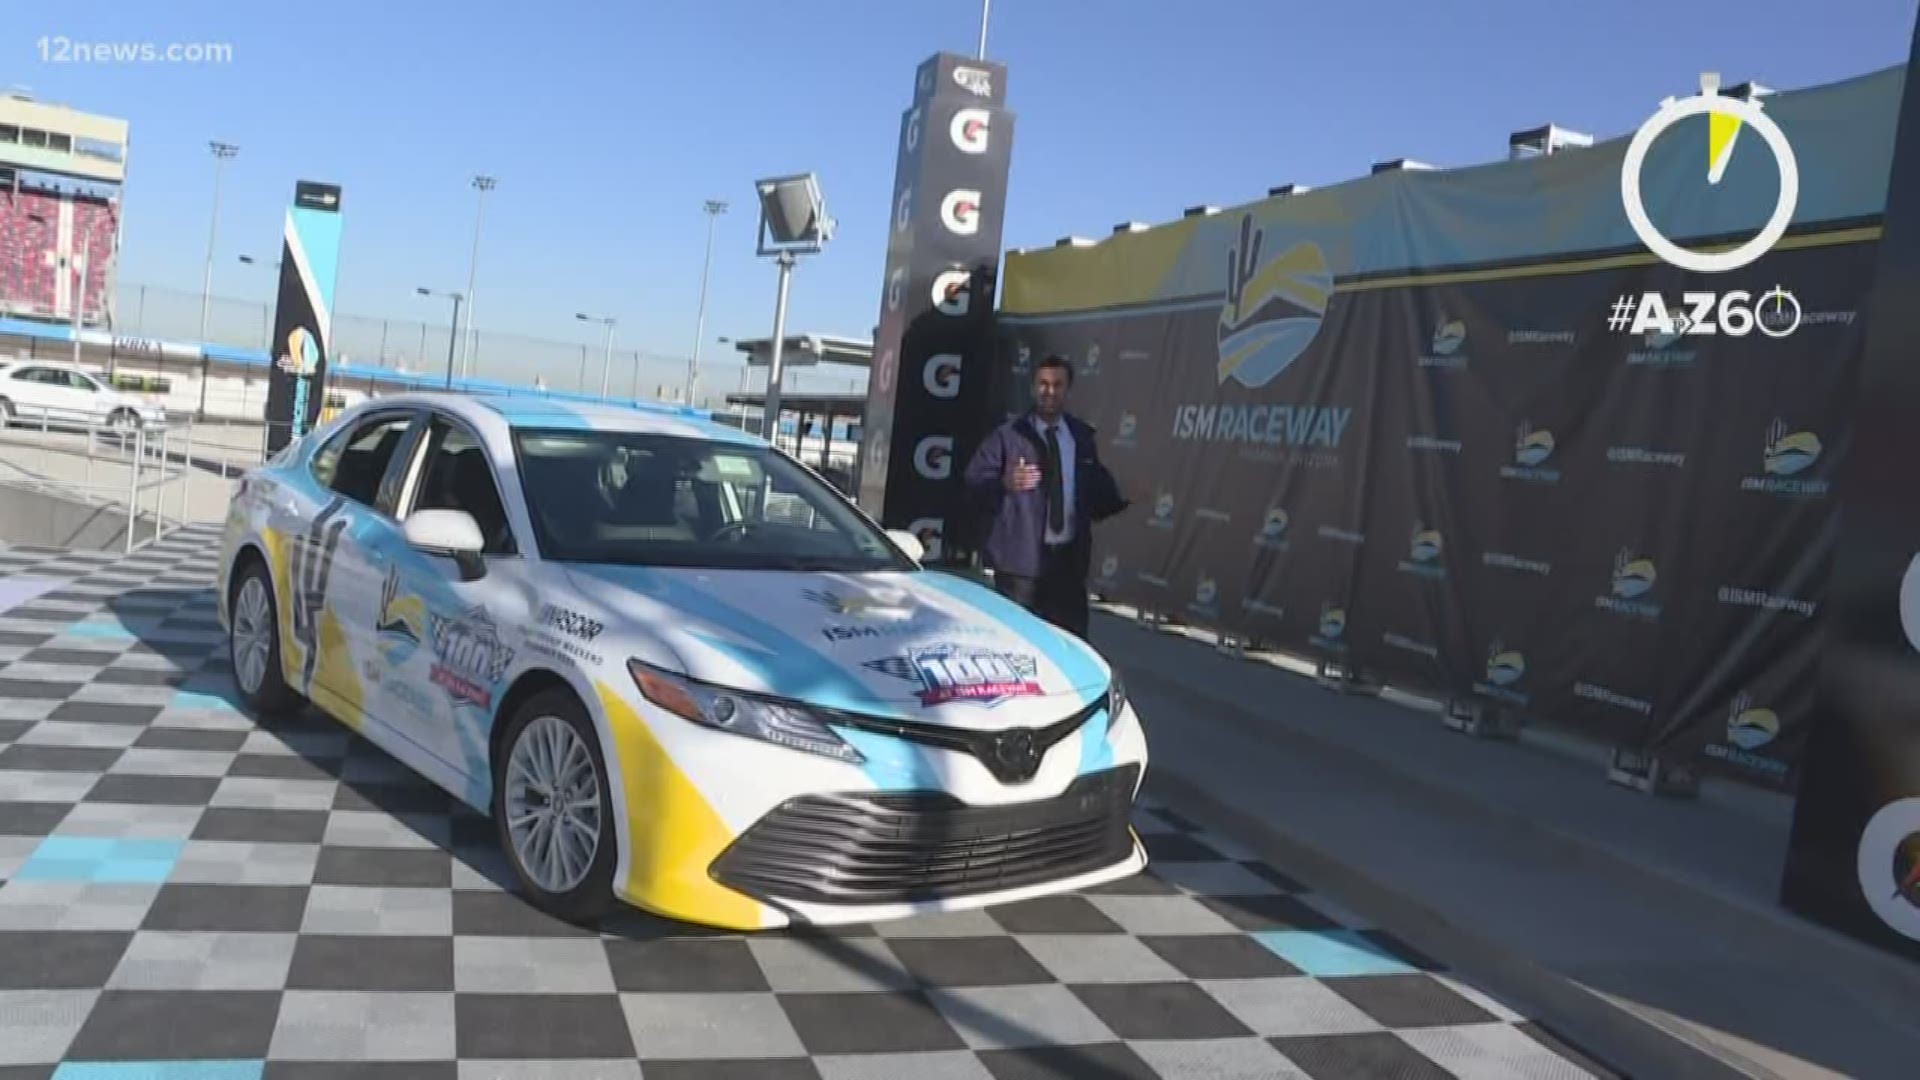 ISM Raceway in Phoenix offers more than just racing events. Matt Yurus has the details.